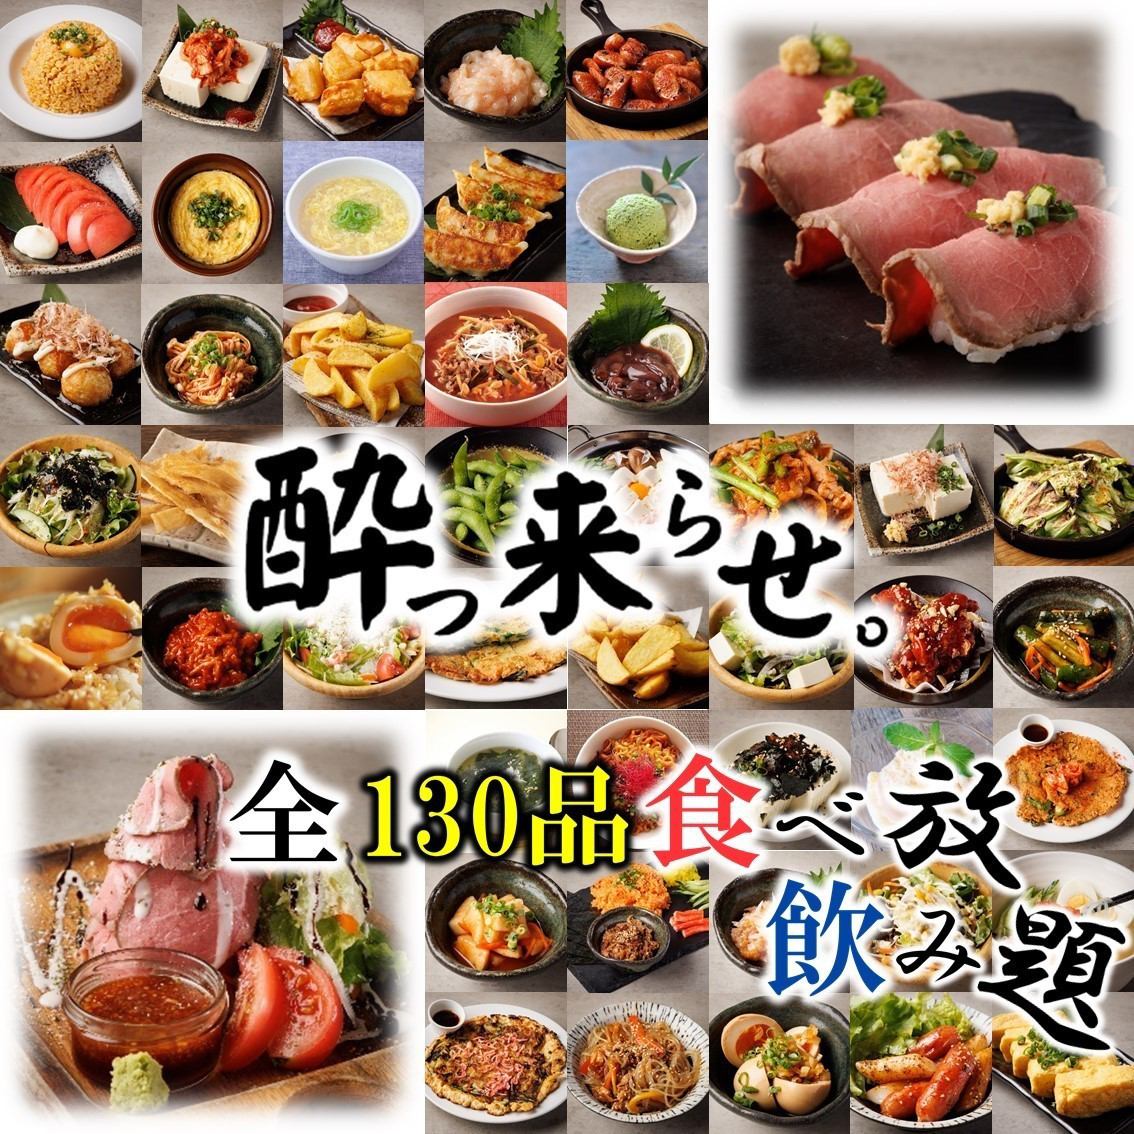 The most cost-effective izakaya where you can enjoy all-you-can-eat and drink meat sushi and roast beef is now open in Susukino☆